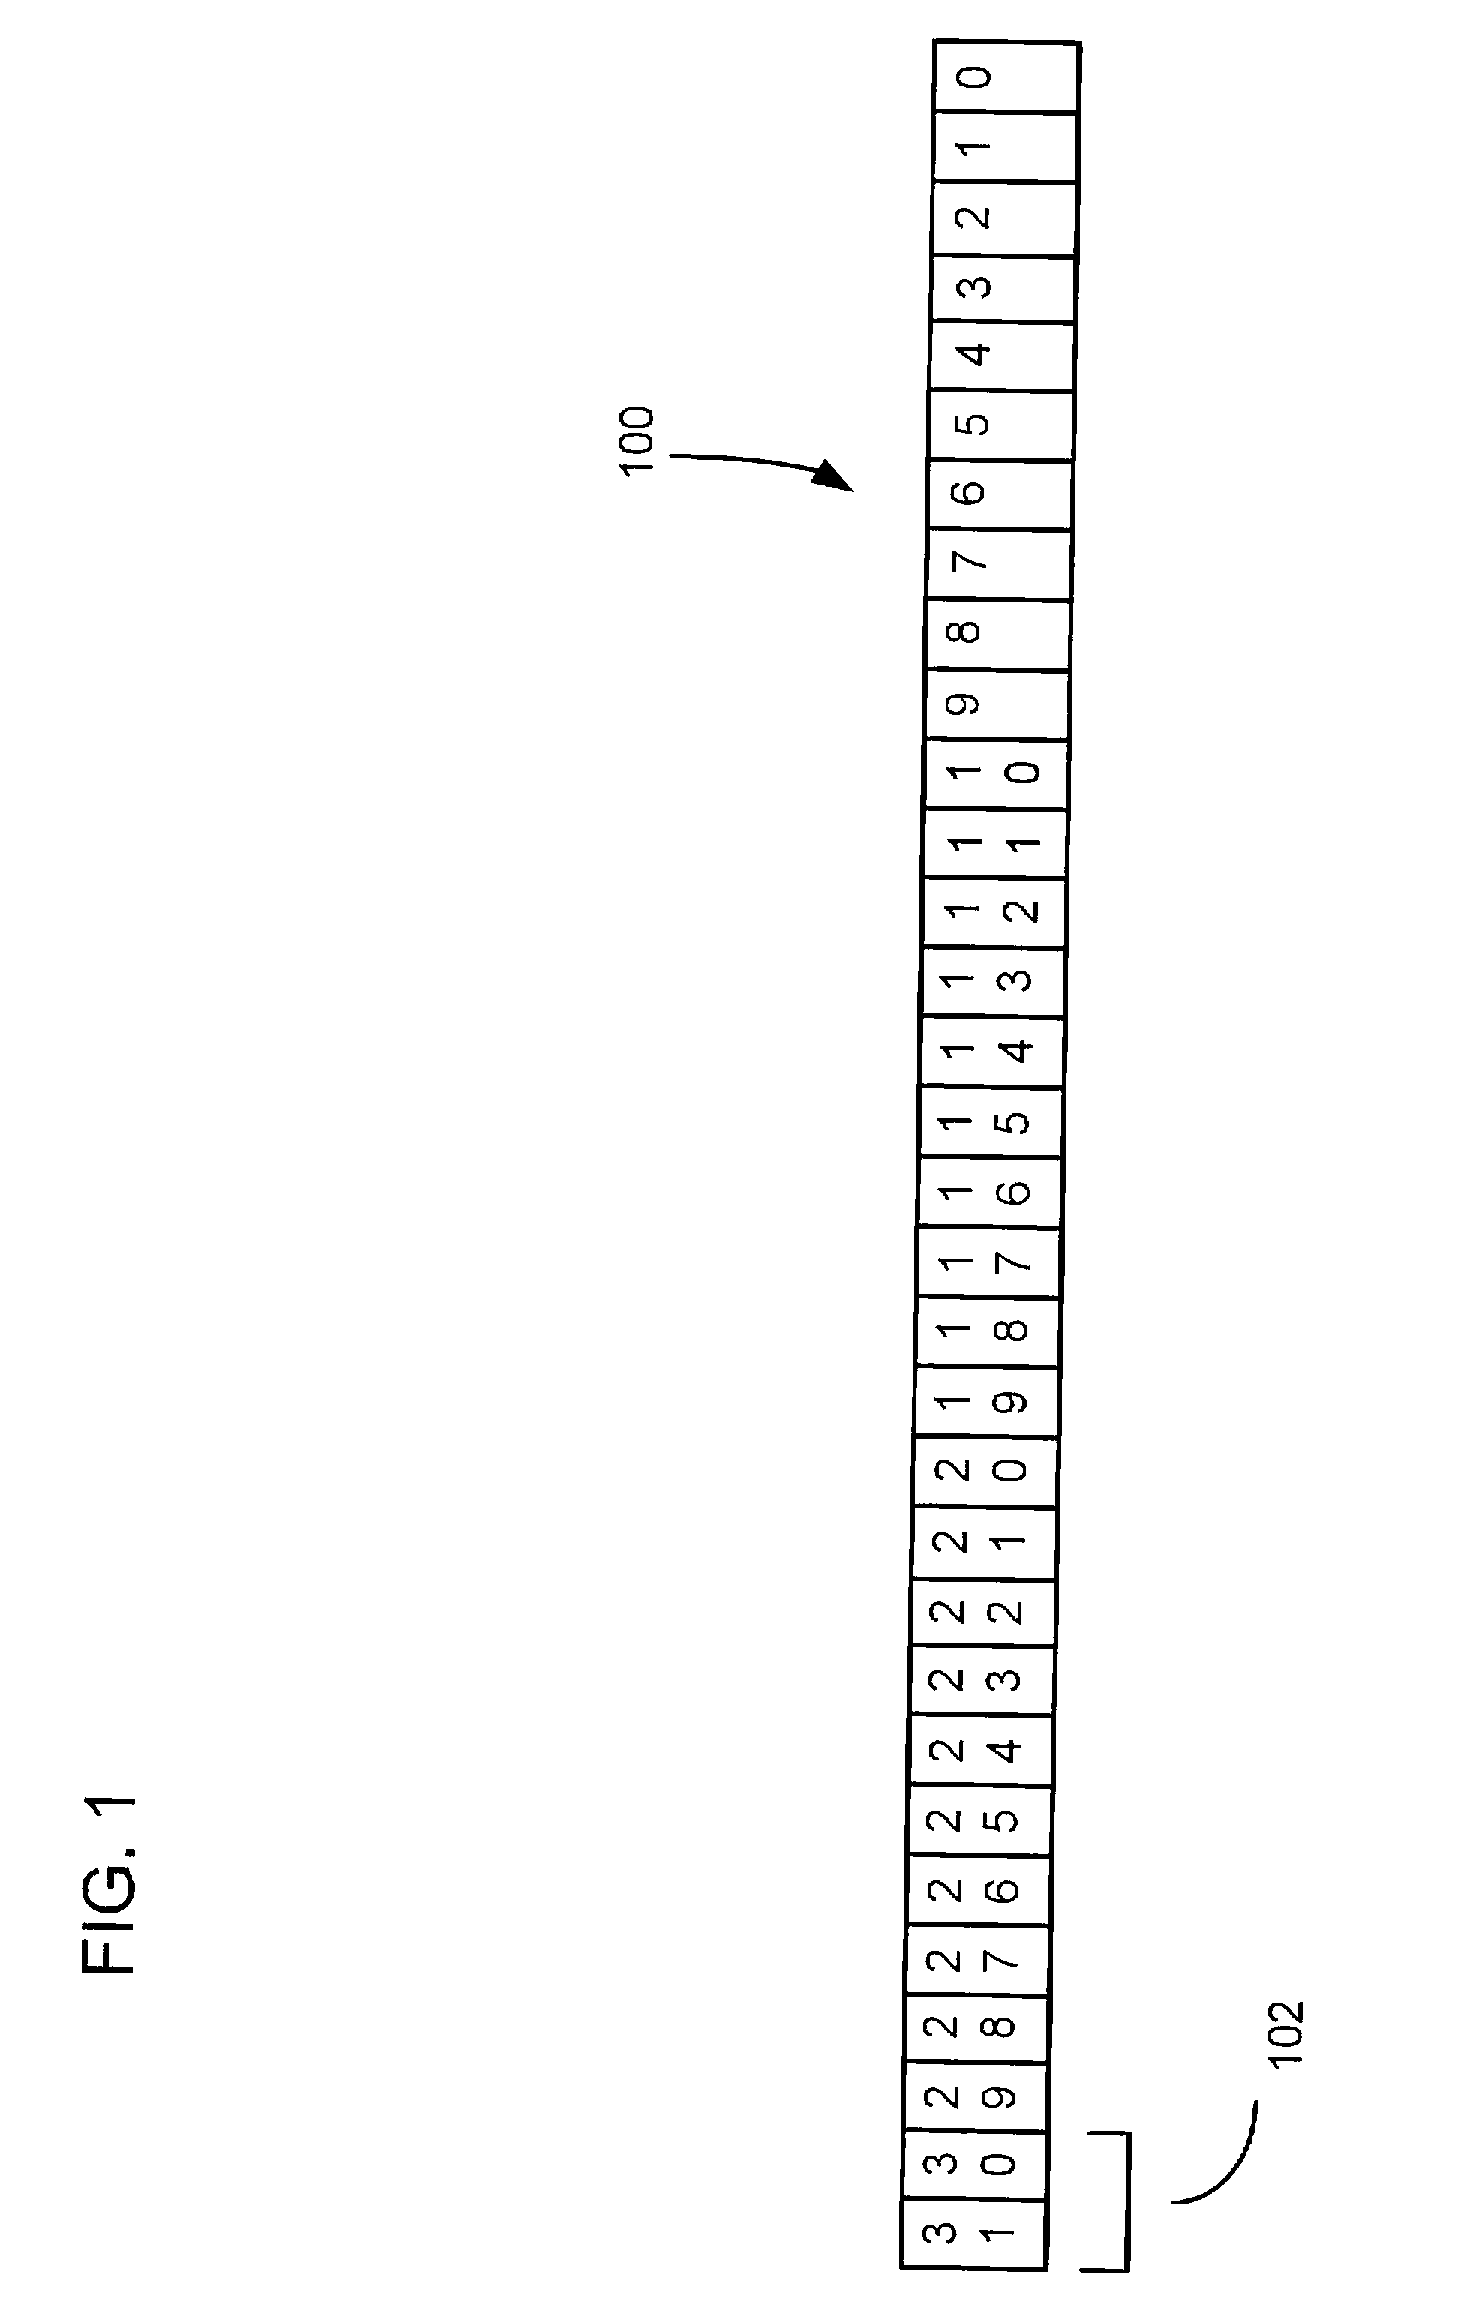 System and method for utilizing a temporary user identity in a telecommunications system